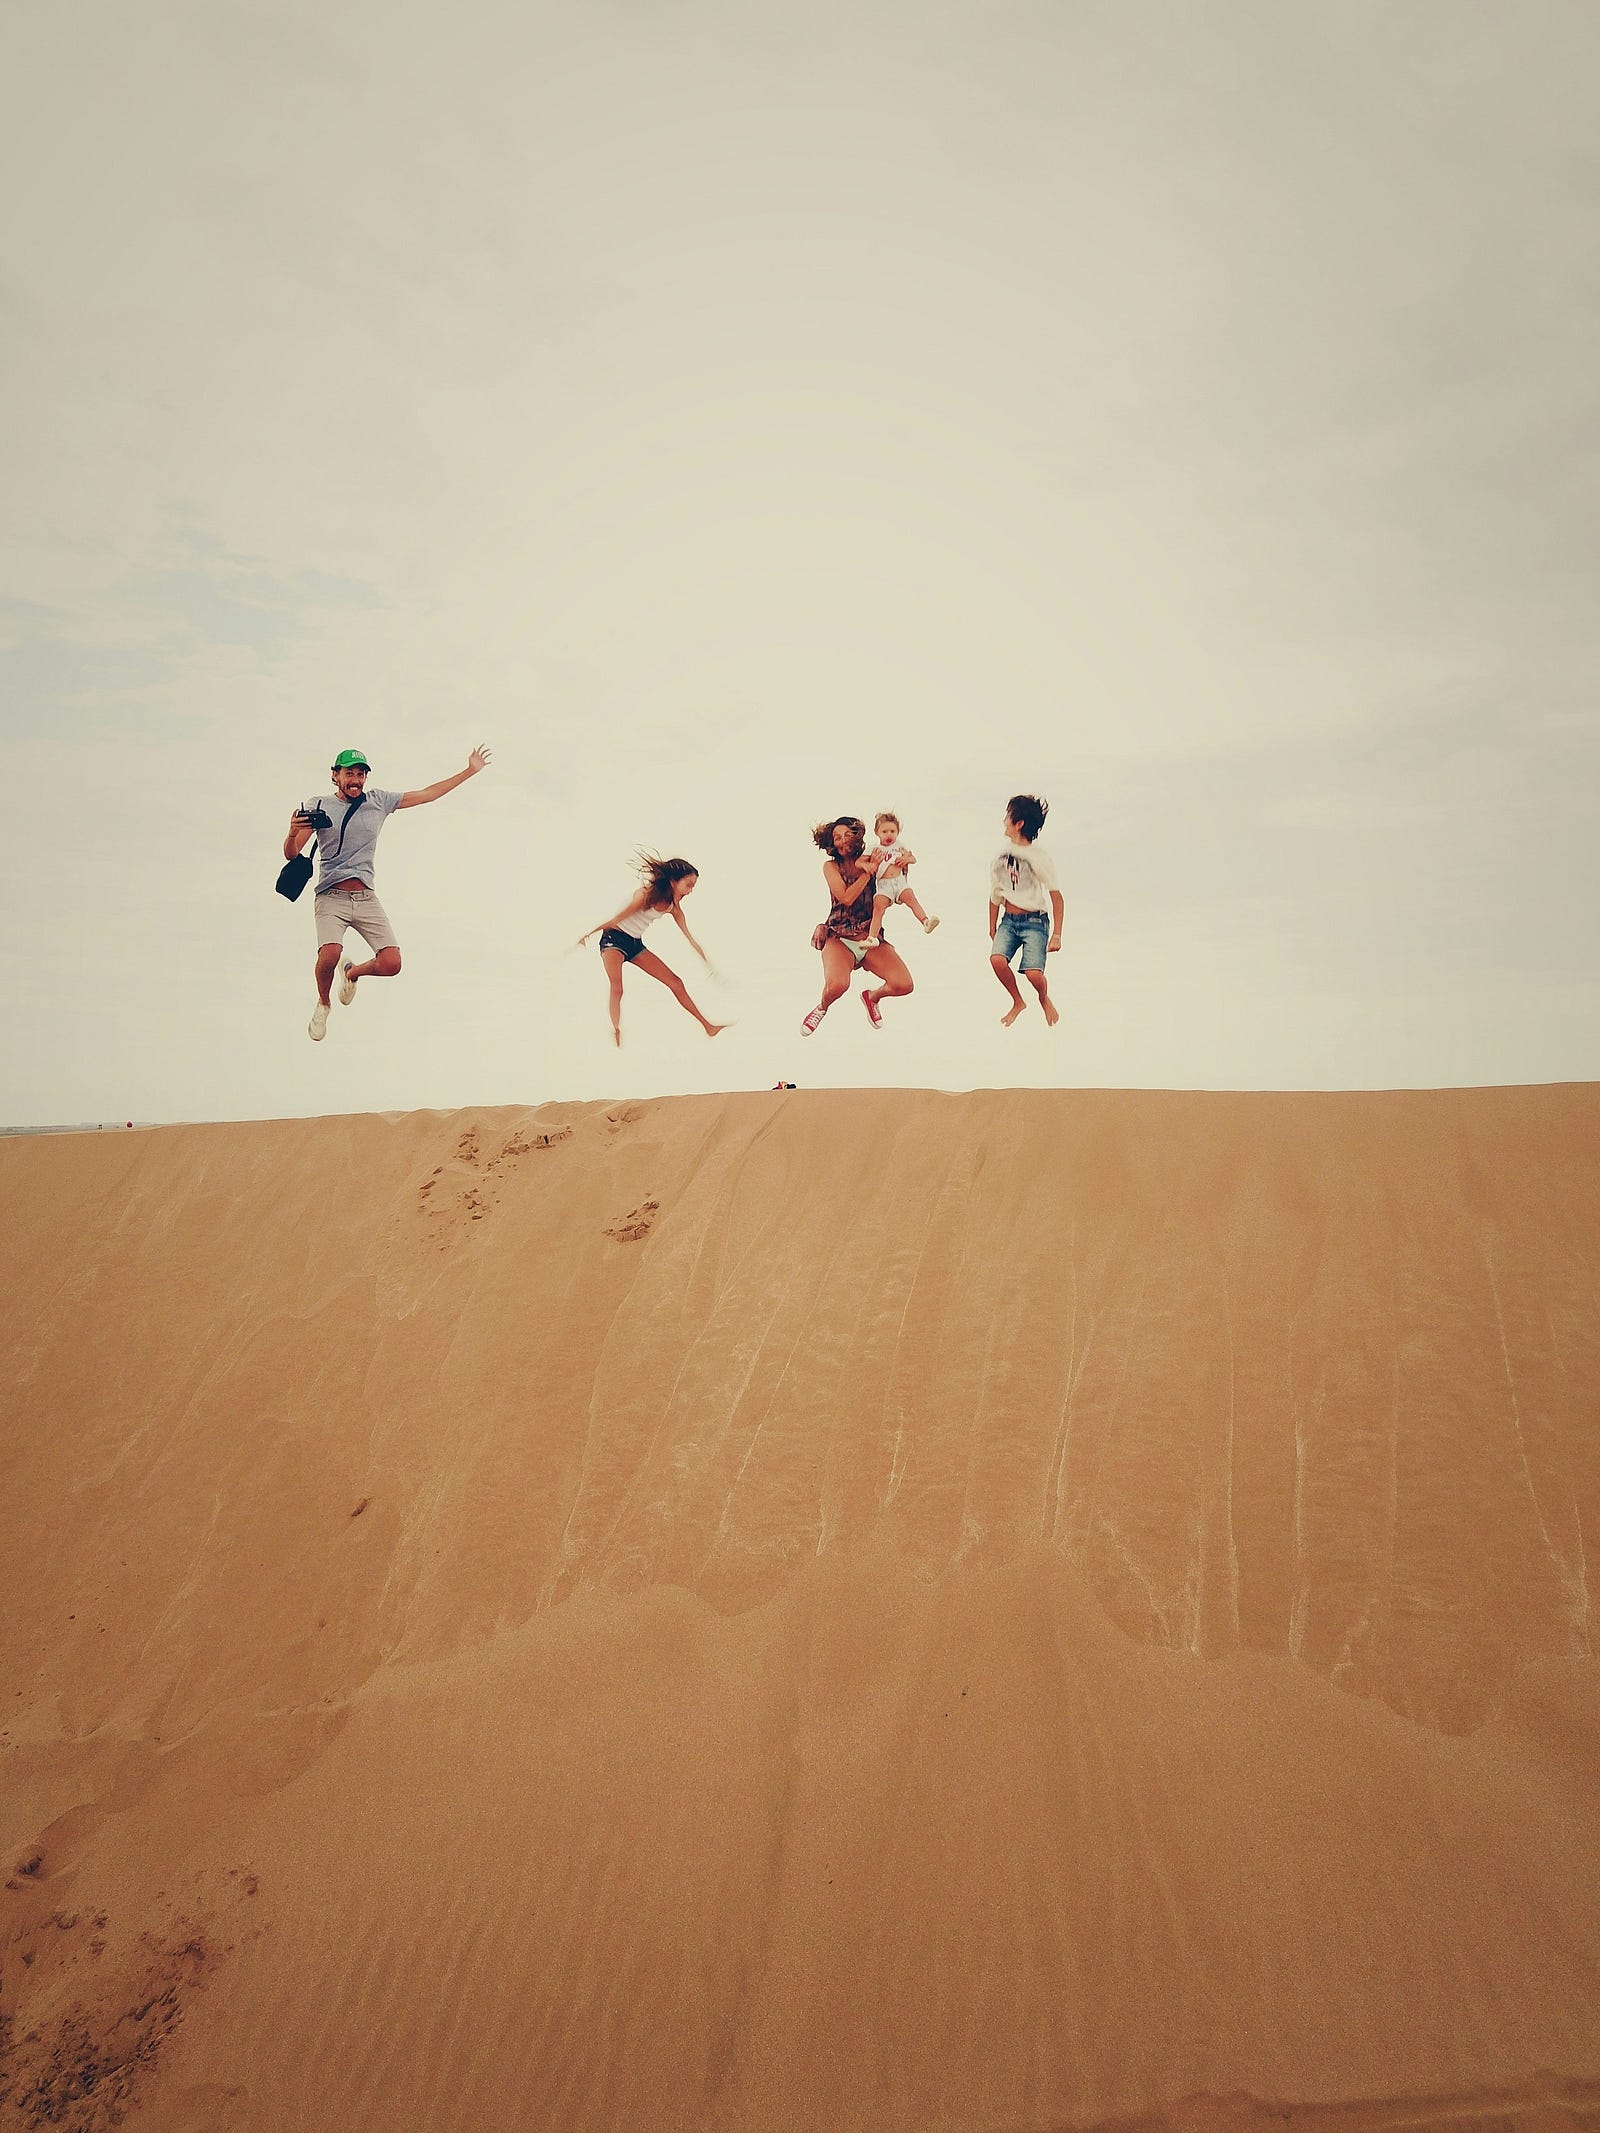 A family of five (two adults, two children, and one baby) jump on a sand dune.